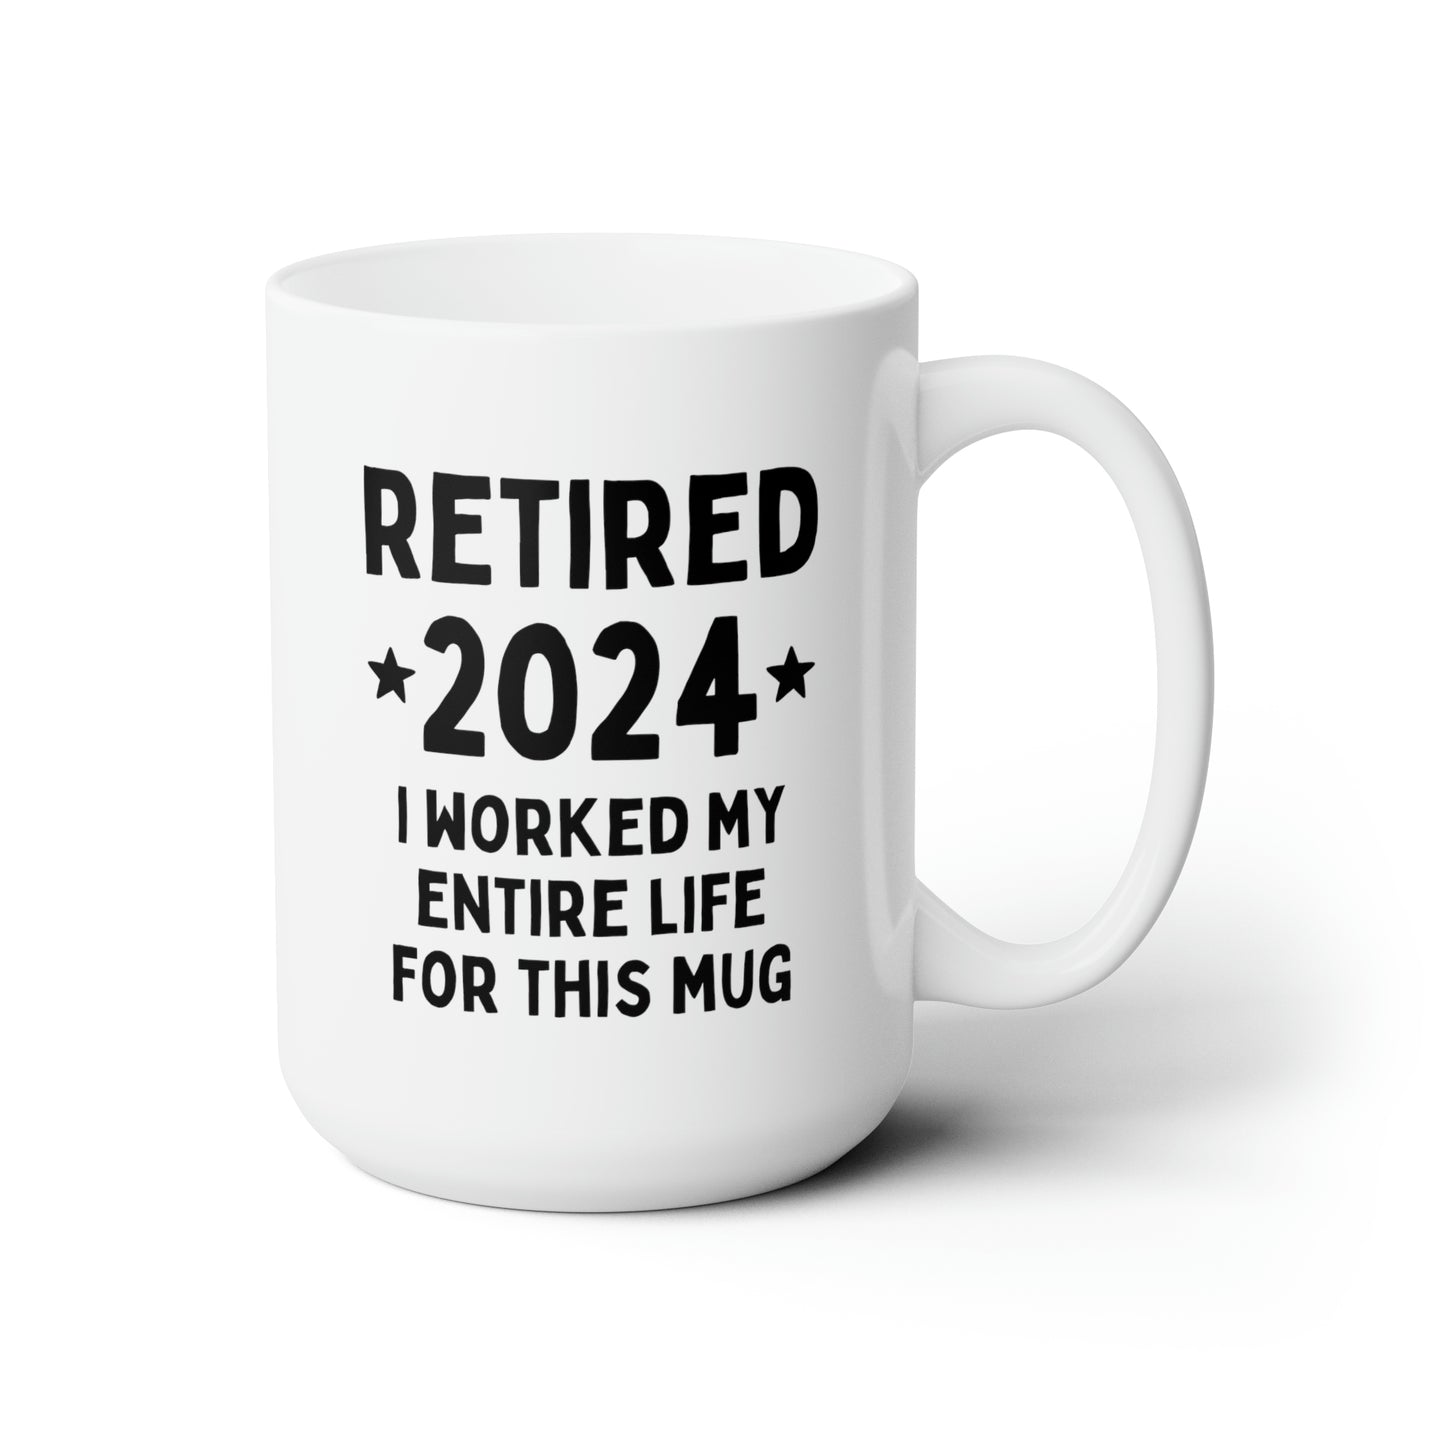 Retired 2024 I Worked My Entire Life For This Mug 15oz white funny large coffee mug gift for retirement man woman waveywares wavey wares wavywares wavy wares